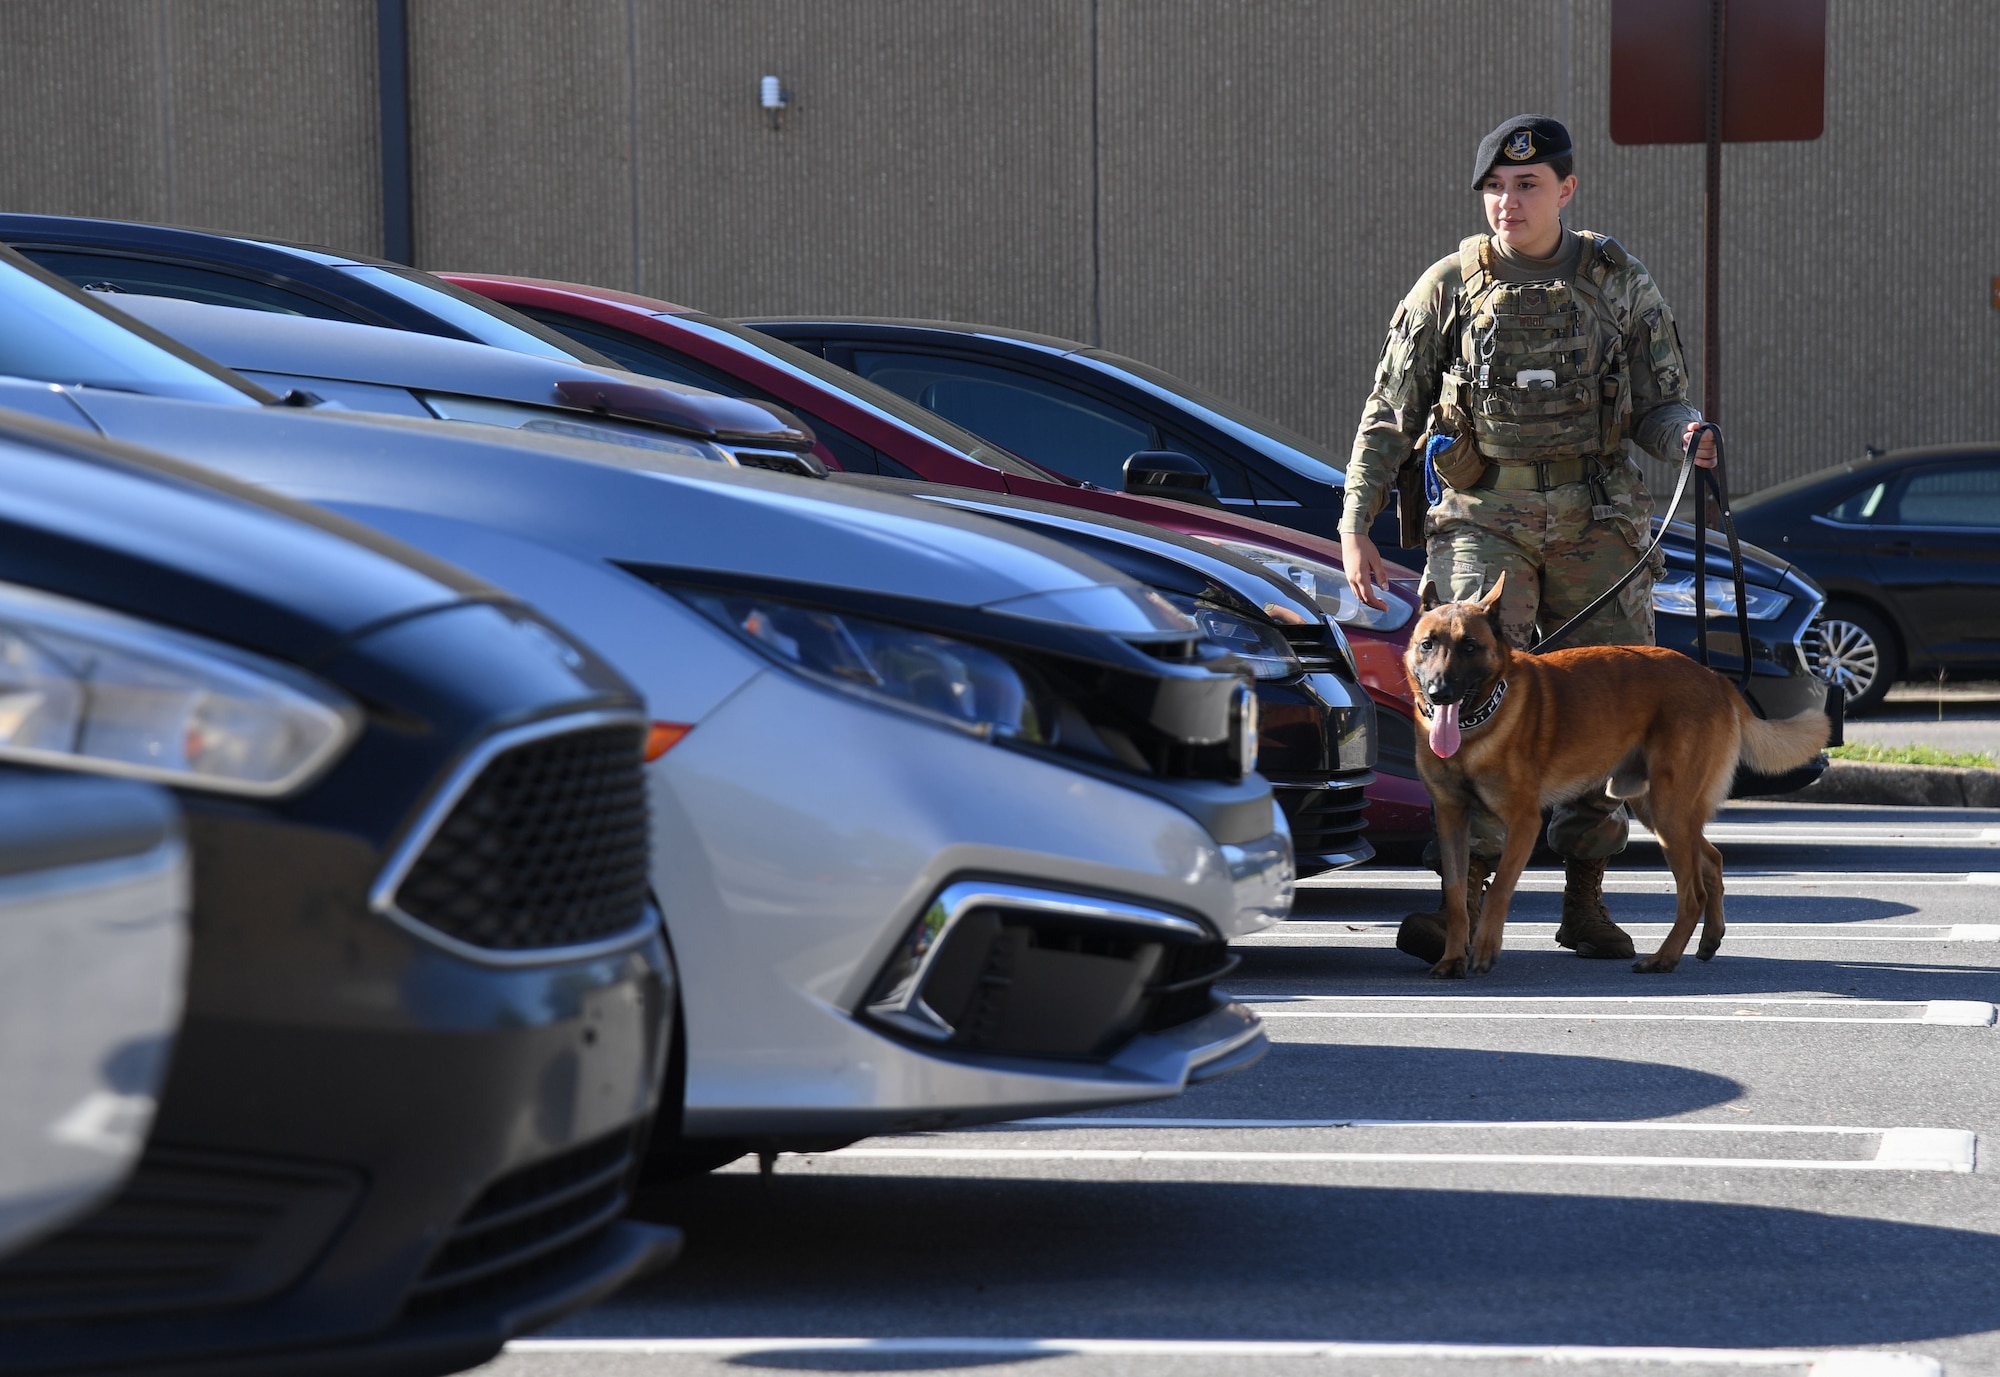 U.S. Air Force Staff Sgt. Ryan Wood, 81st Security Forces Squadron military working dog handler, and Victor, 81st SFS military working dog, conducts detection capabilities on vehicles during an All-Female Flight work day at Keesler Air Force Base, Mississippi, March 30, 2023.